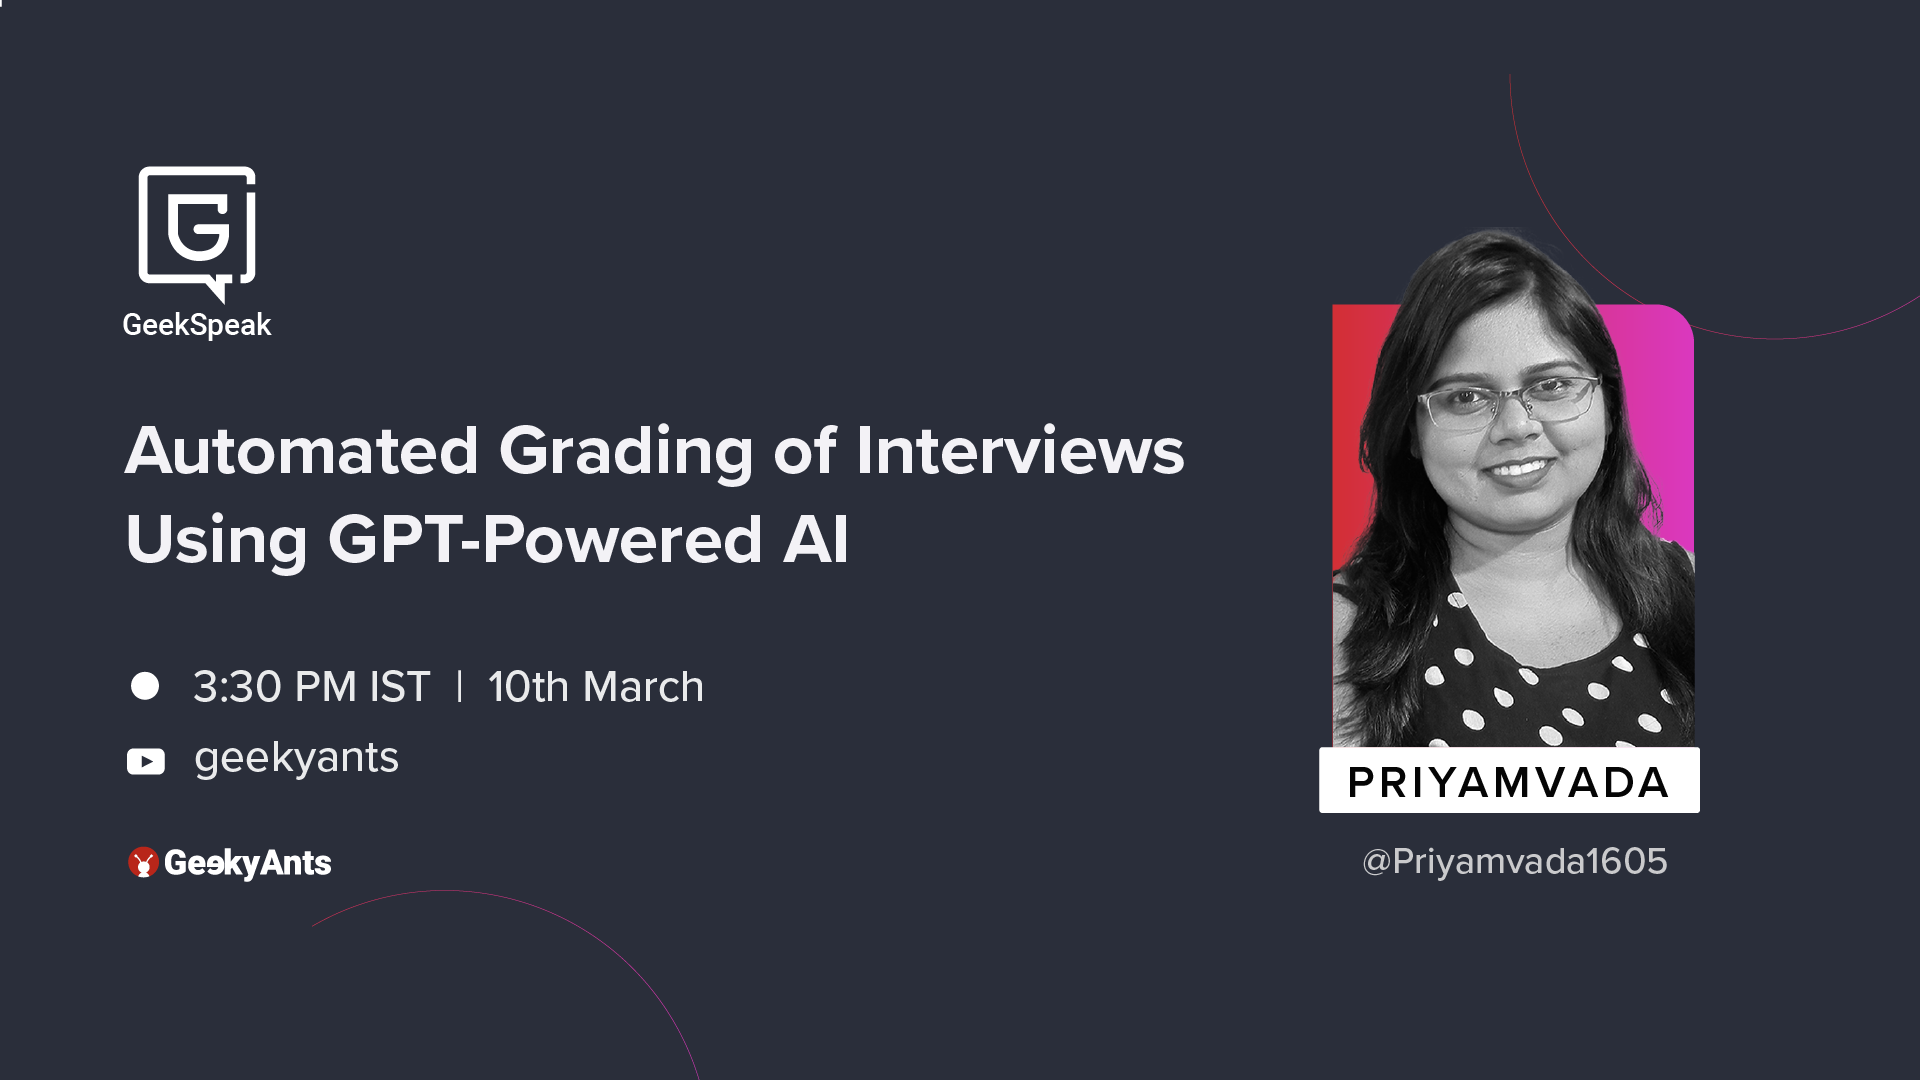 Automated Grading of Interviews Using GPT-Powered AI